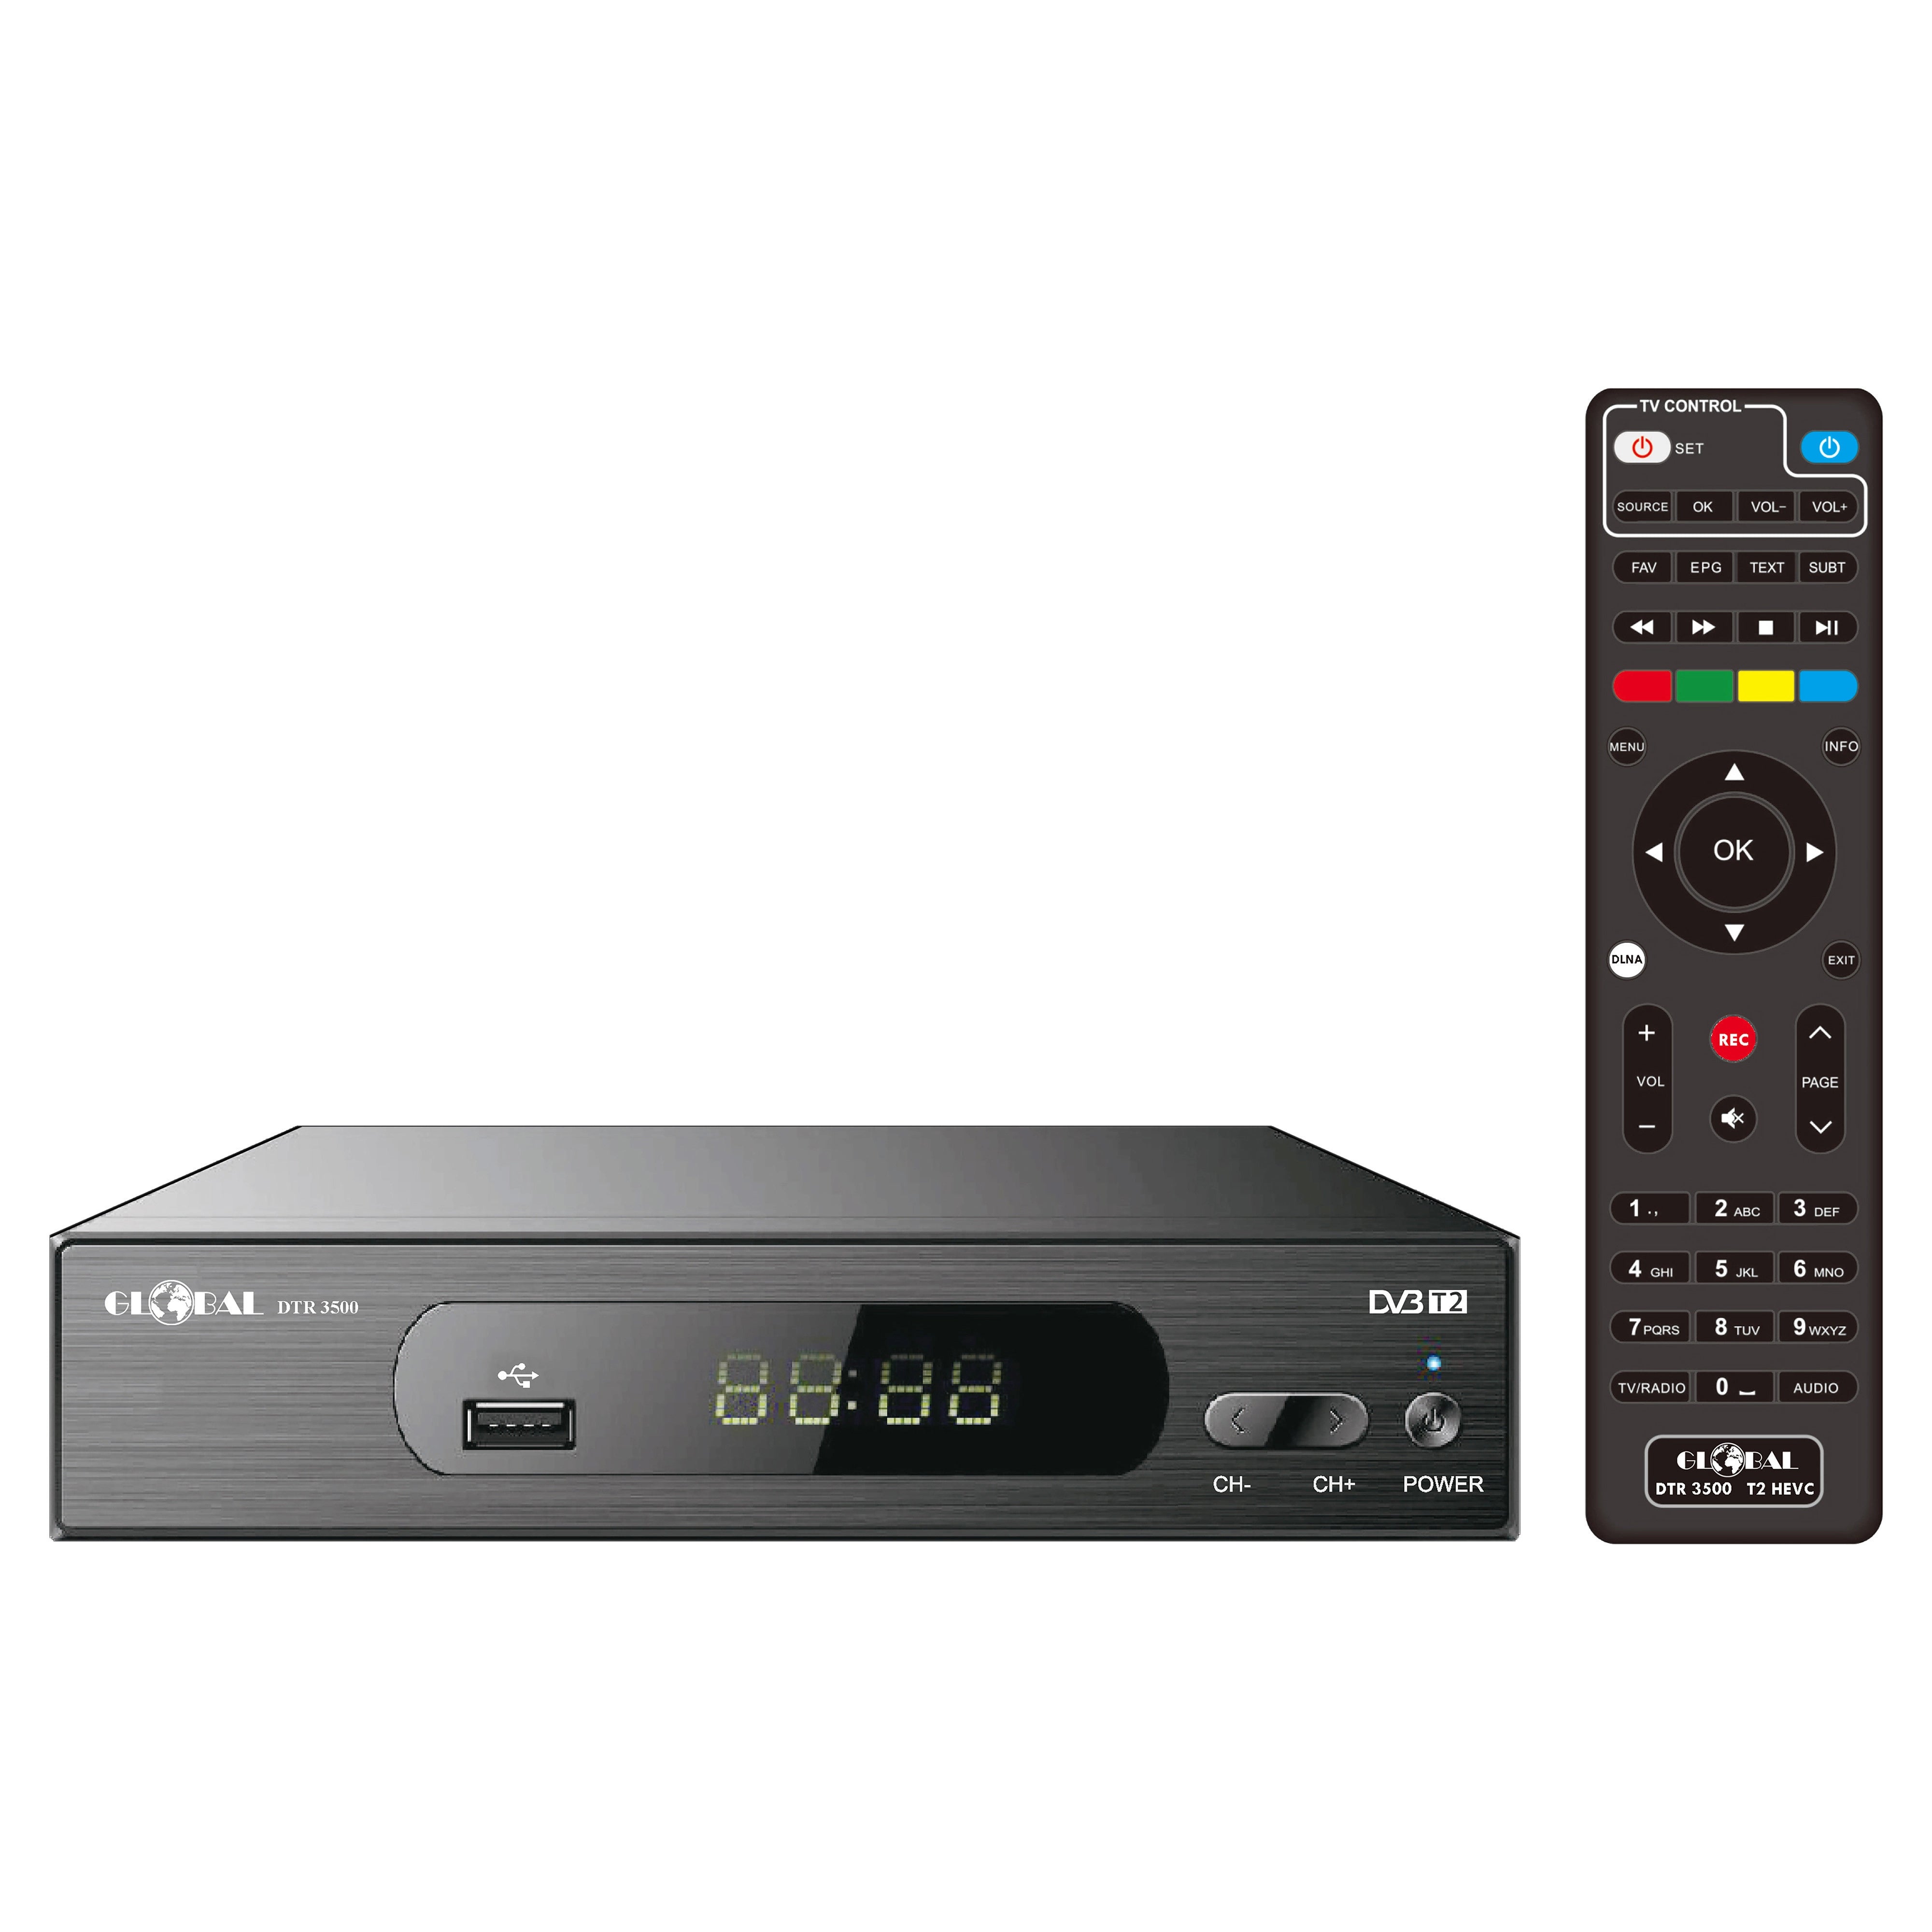 TECNOMAT Sat-TV systems and telephone accessories